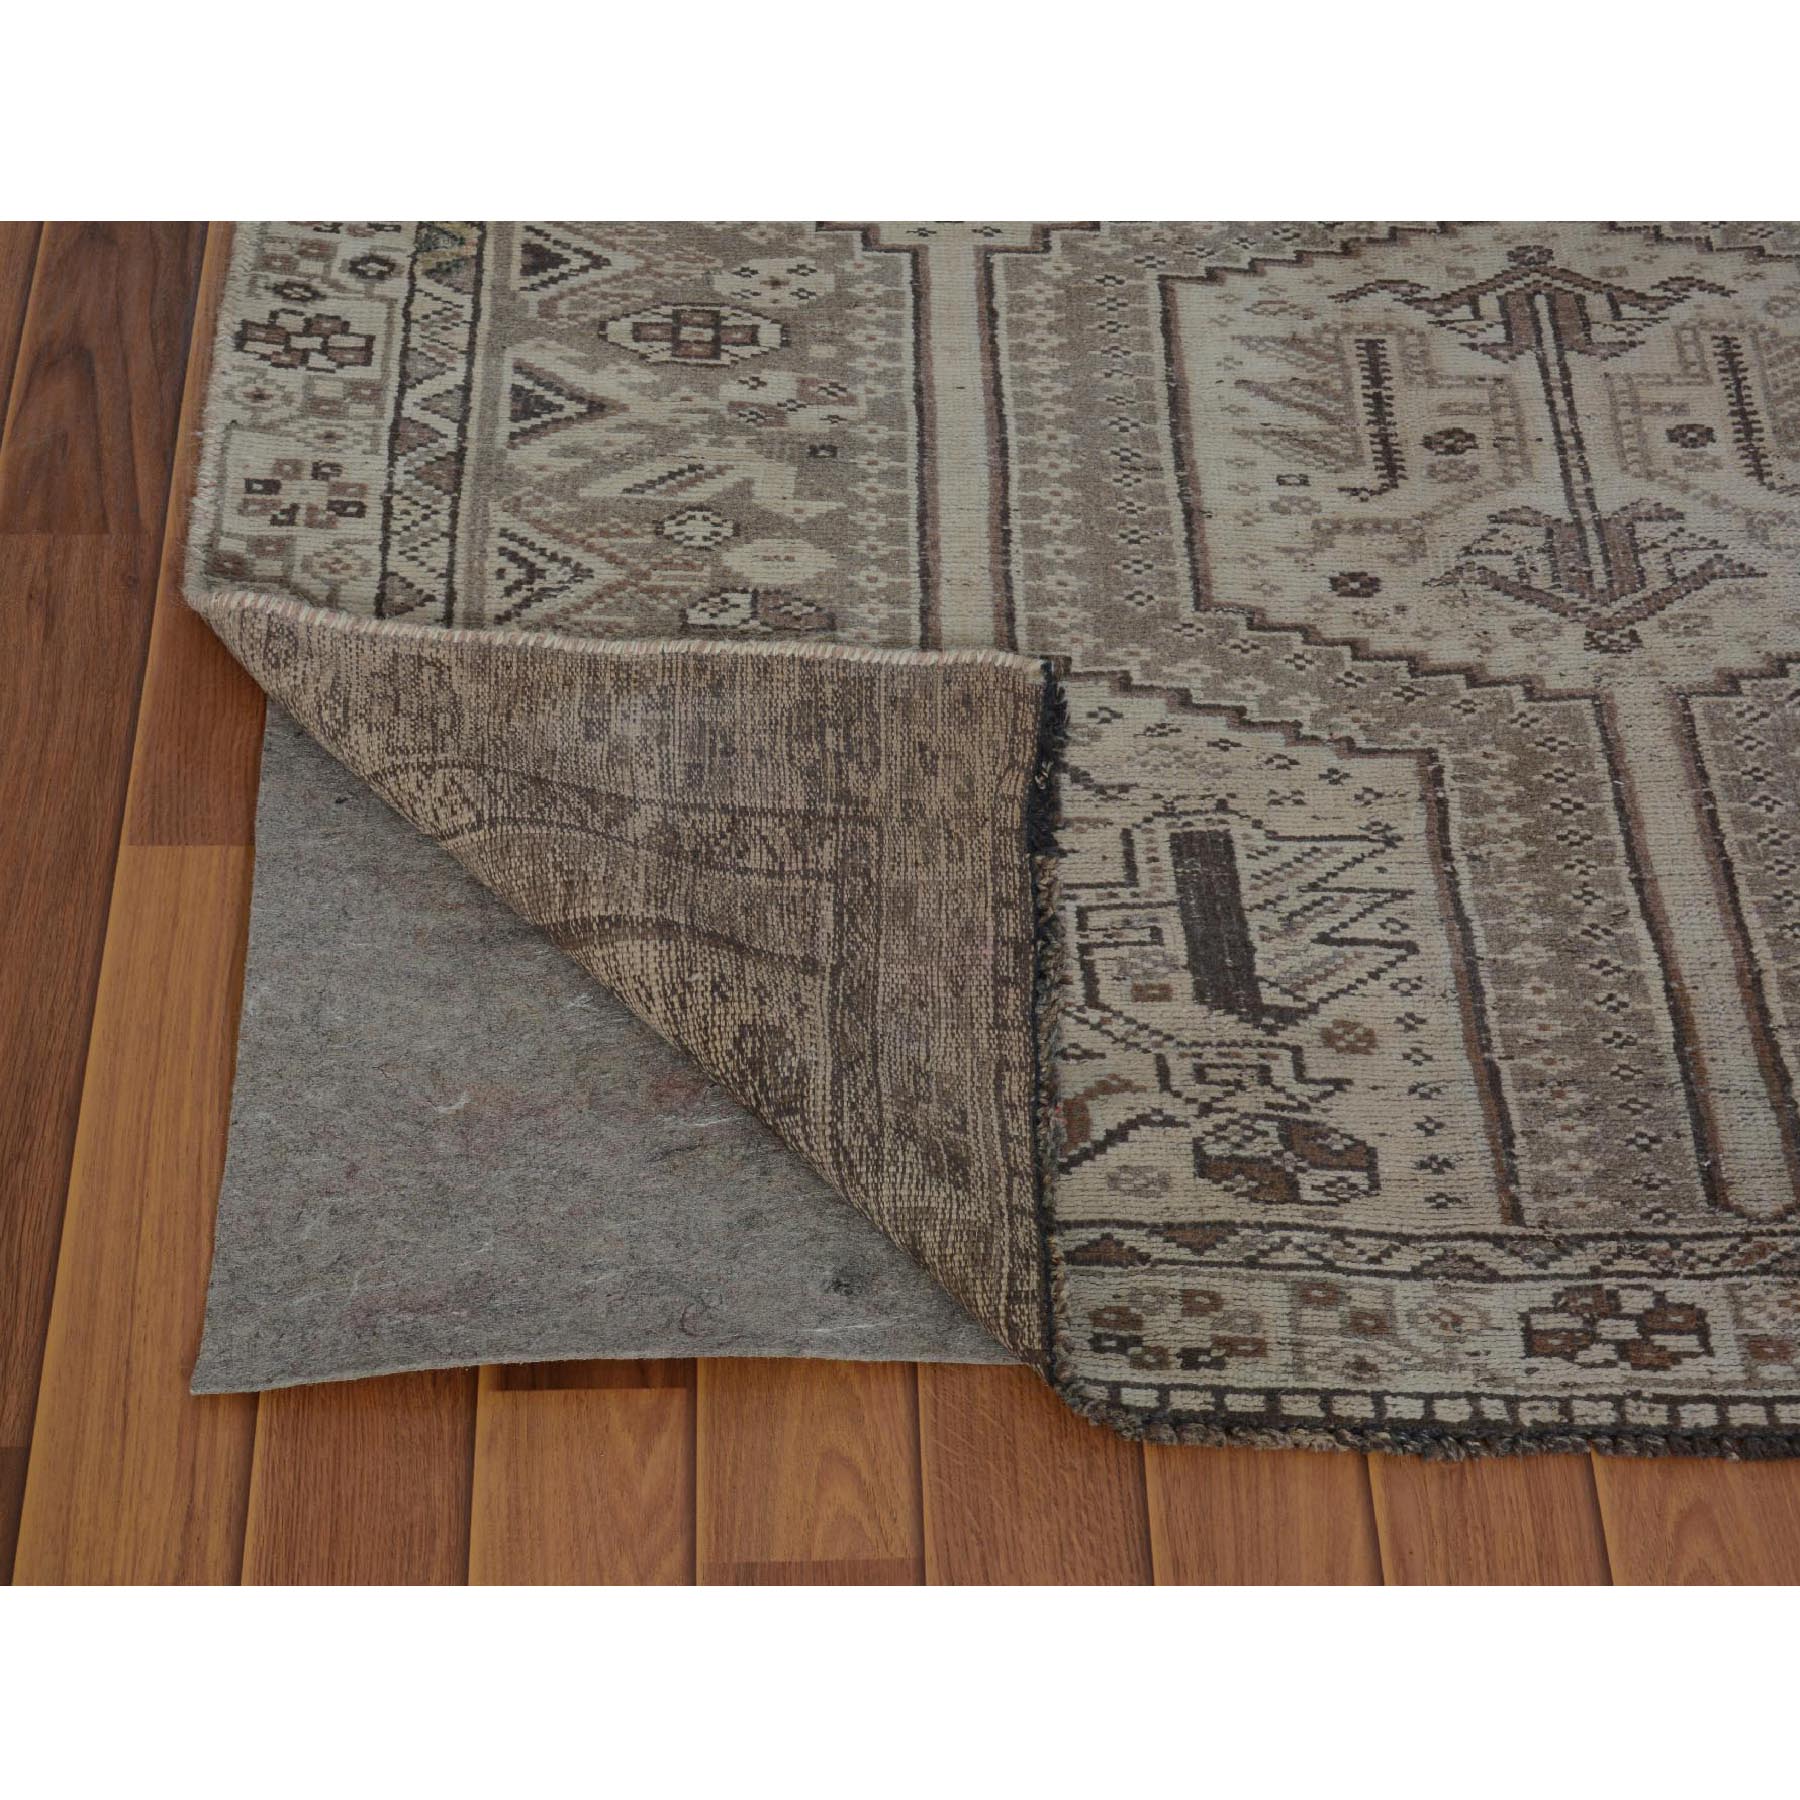 4-9 x7-4  Earth Tones Colors Vintage And Worn Down Persian Shiraz Hand Knotted Oriental Rug 